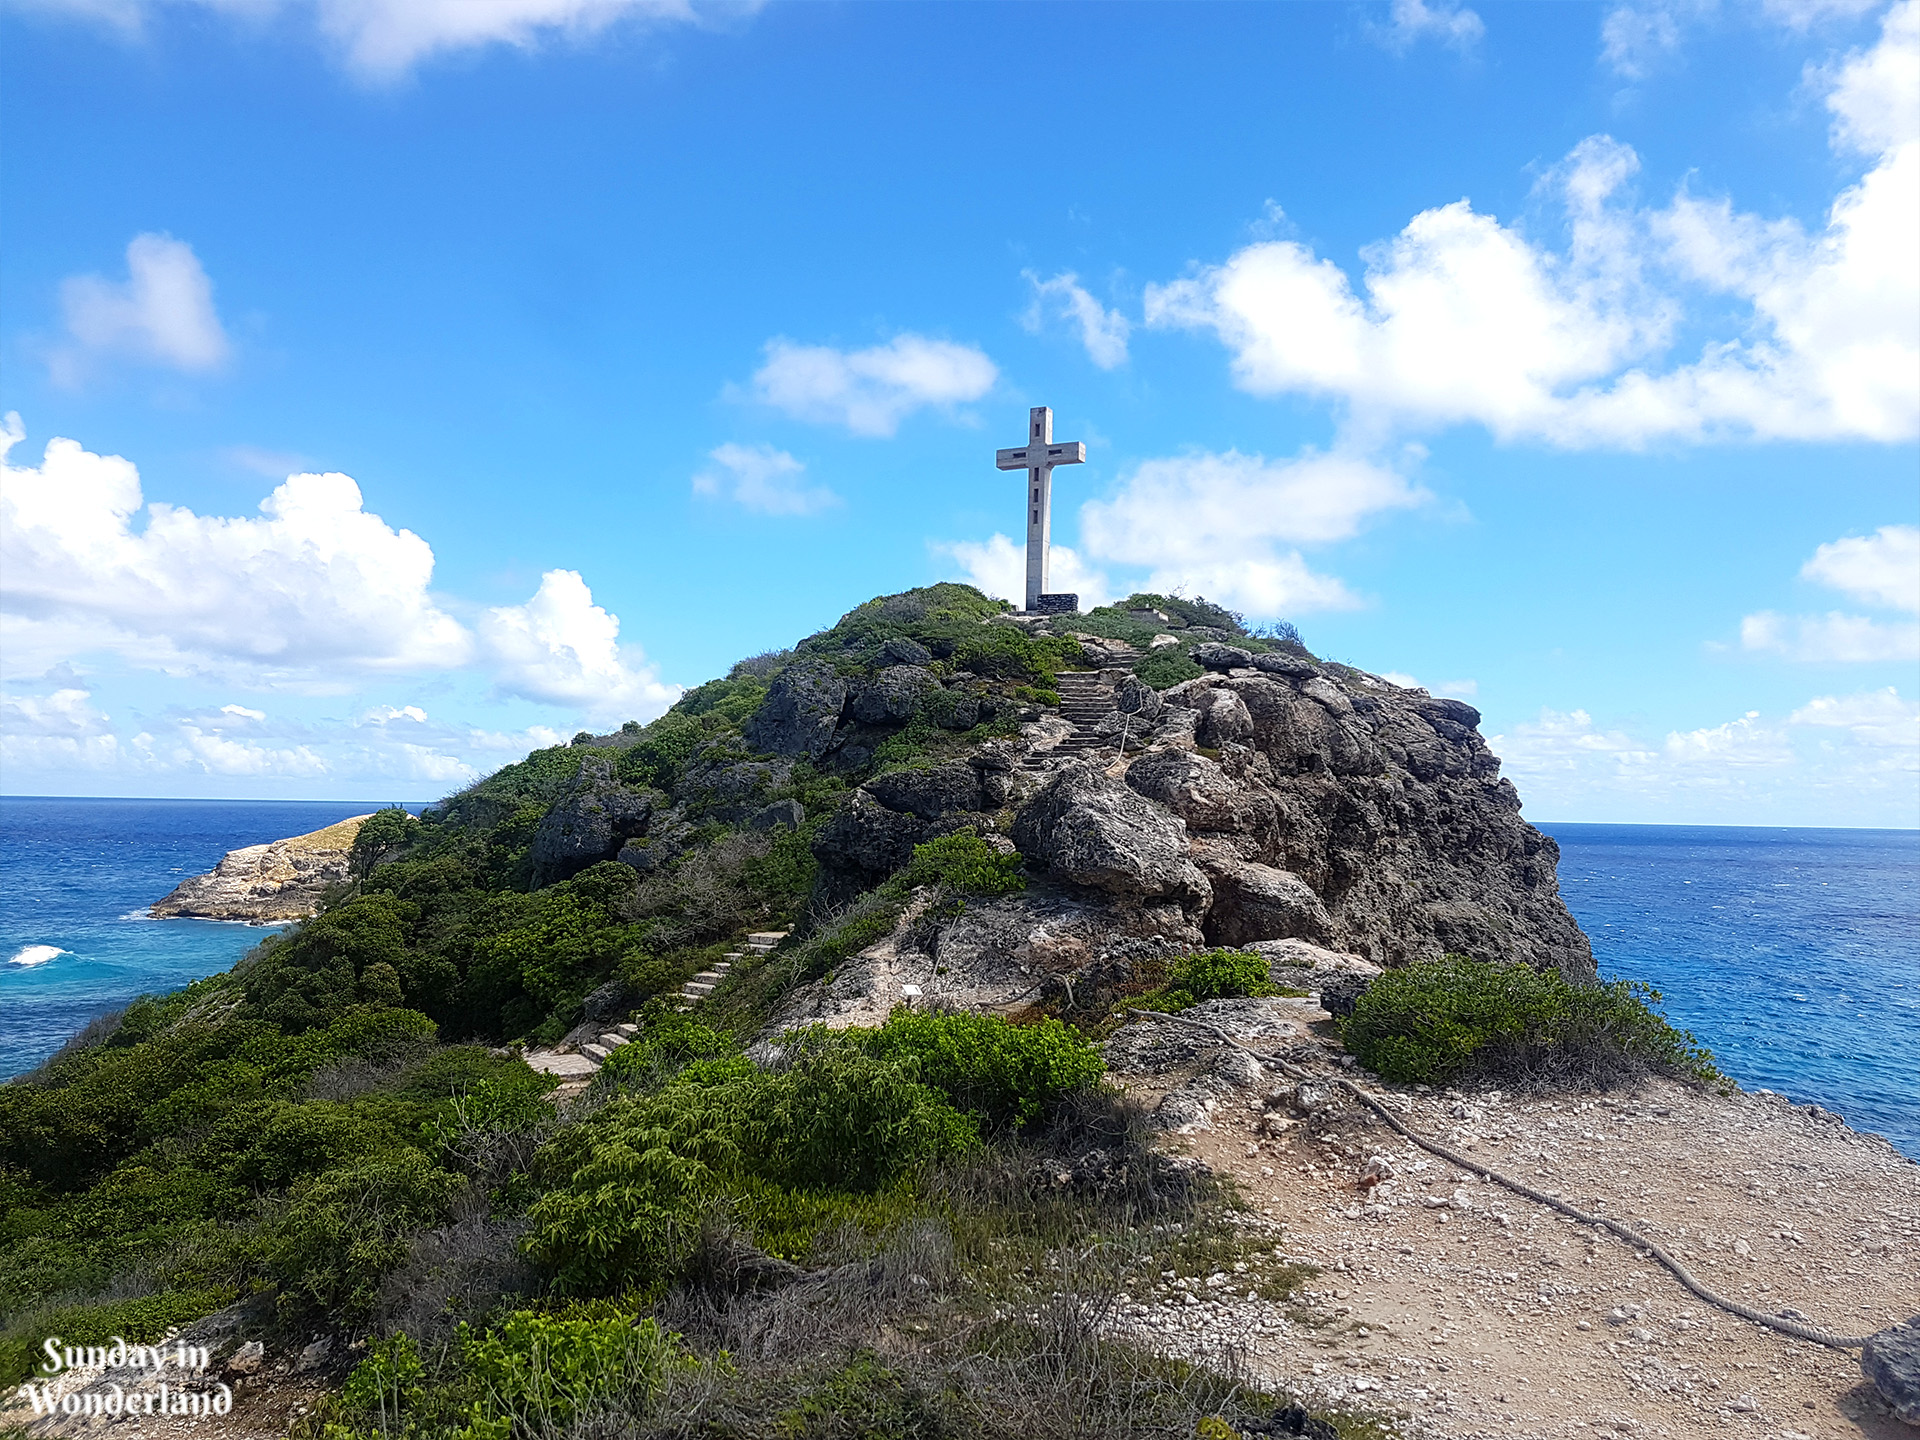 The heighest point on Pointe des Chateaux with the cross - Sunday in Wonderland Blog